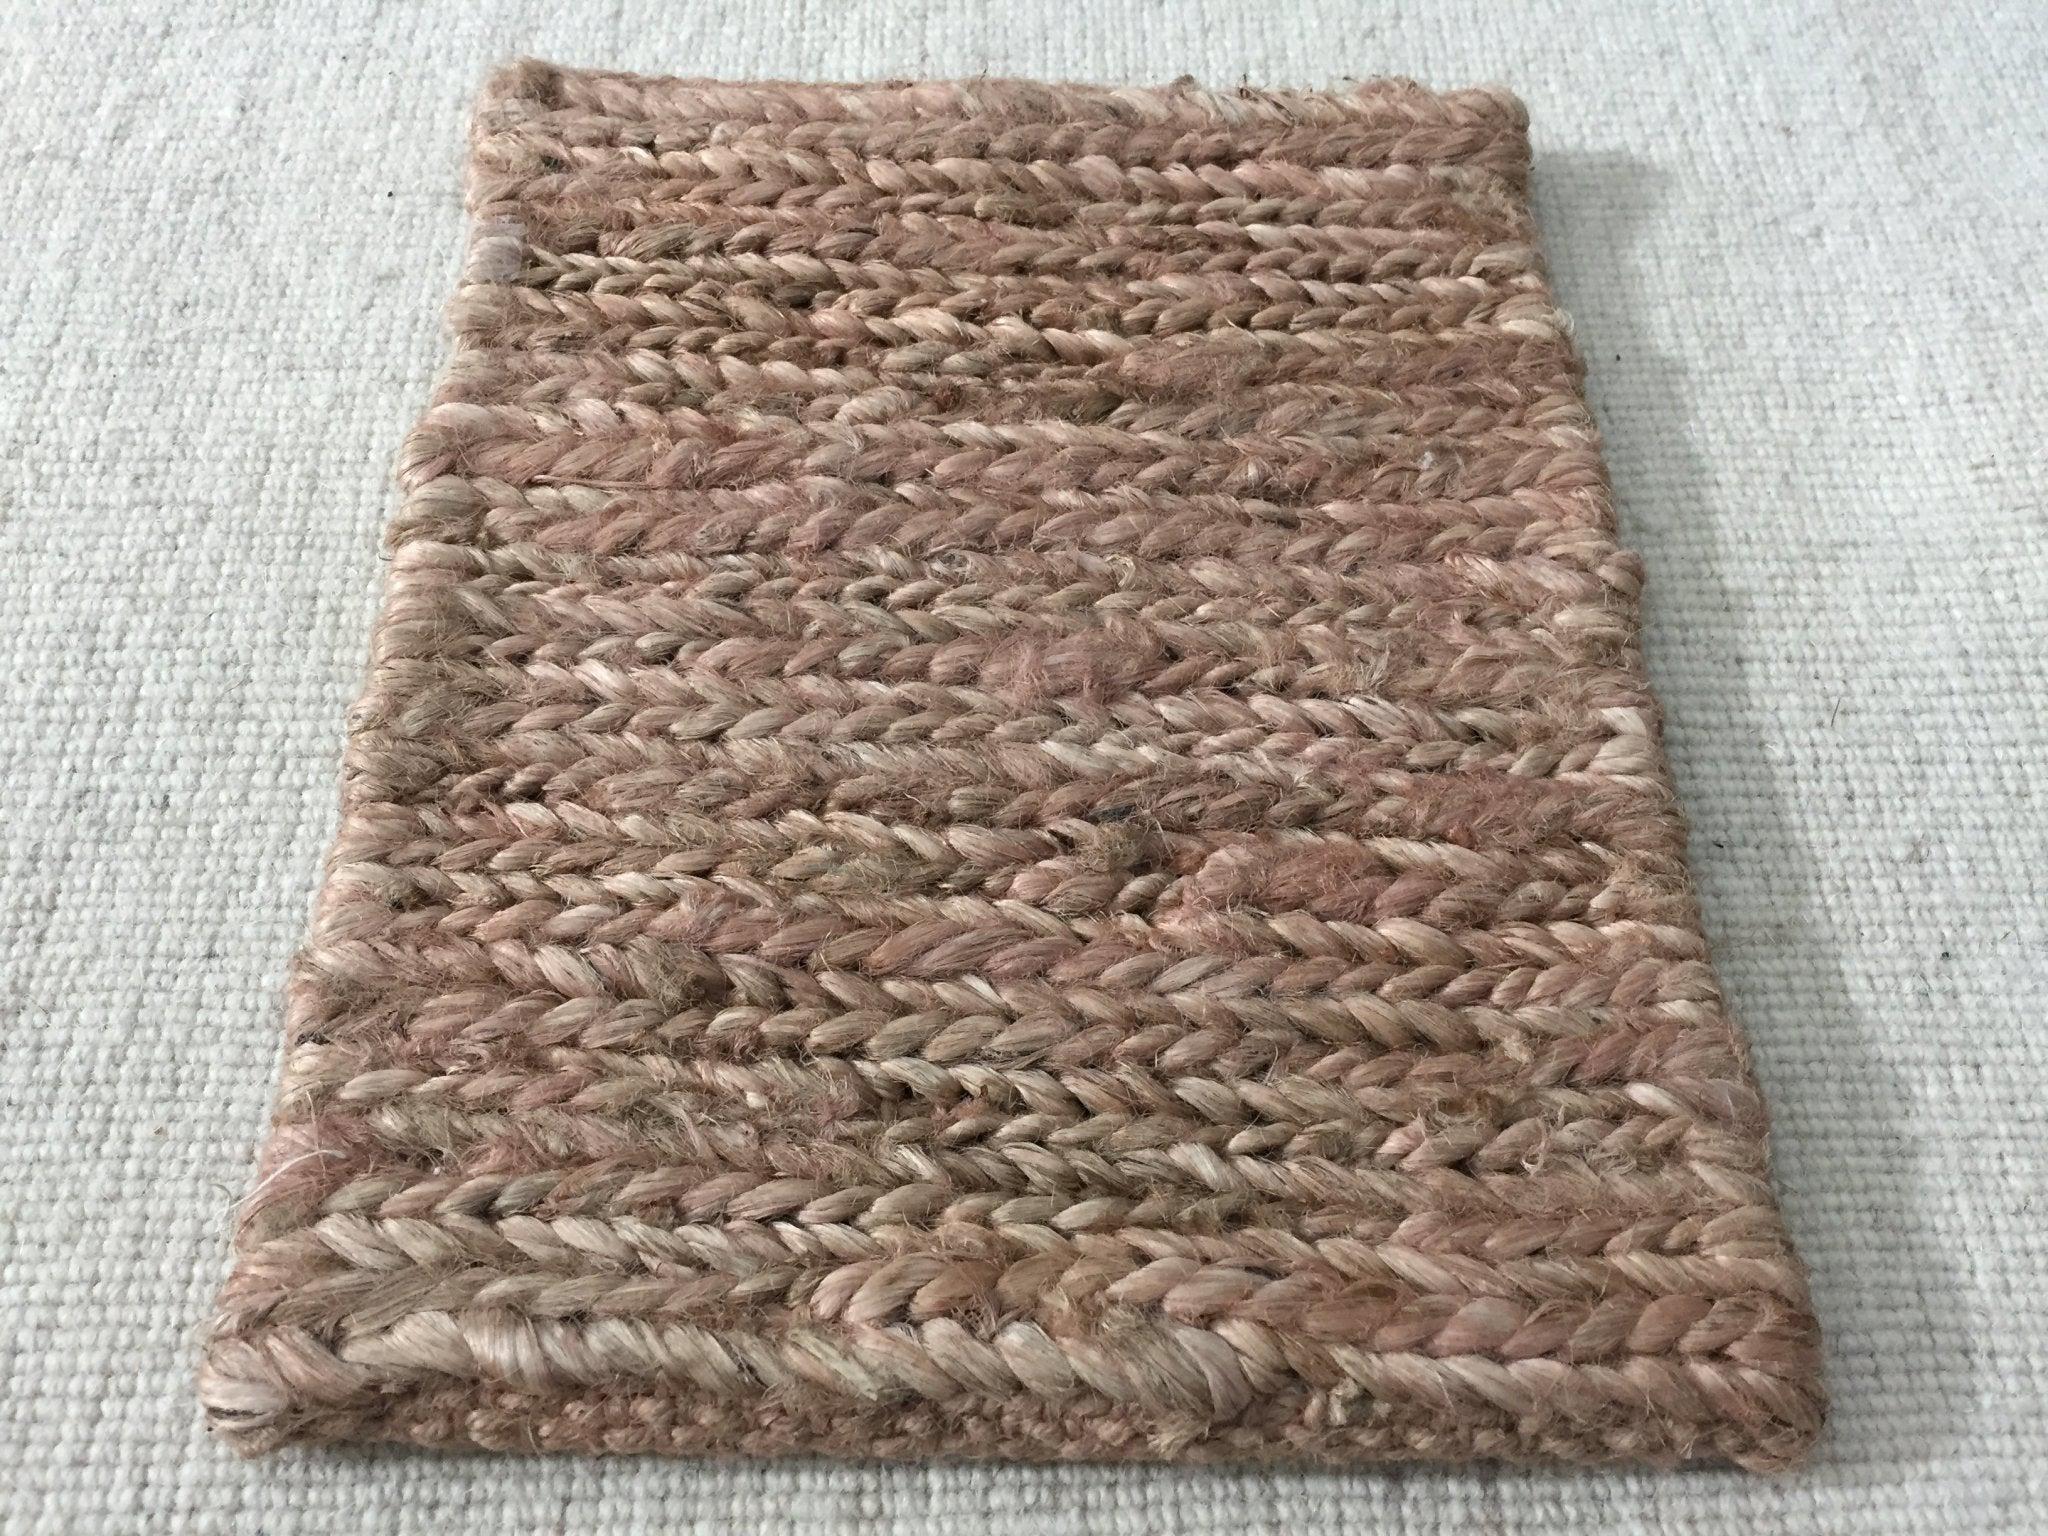 Jute By the People For the People in 7 More Colors | Banana Manor Rug Company